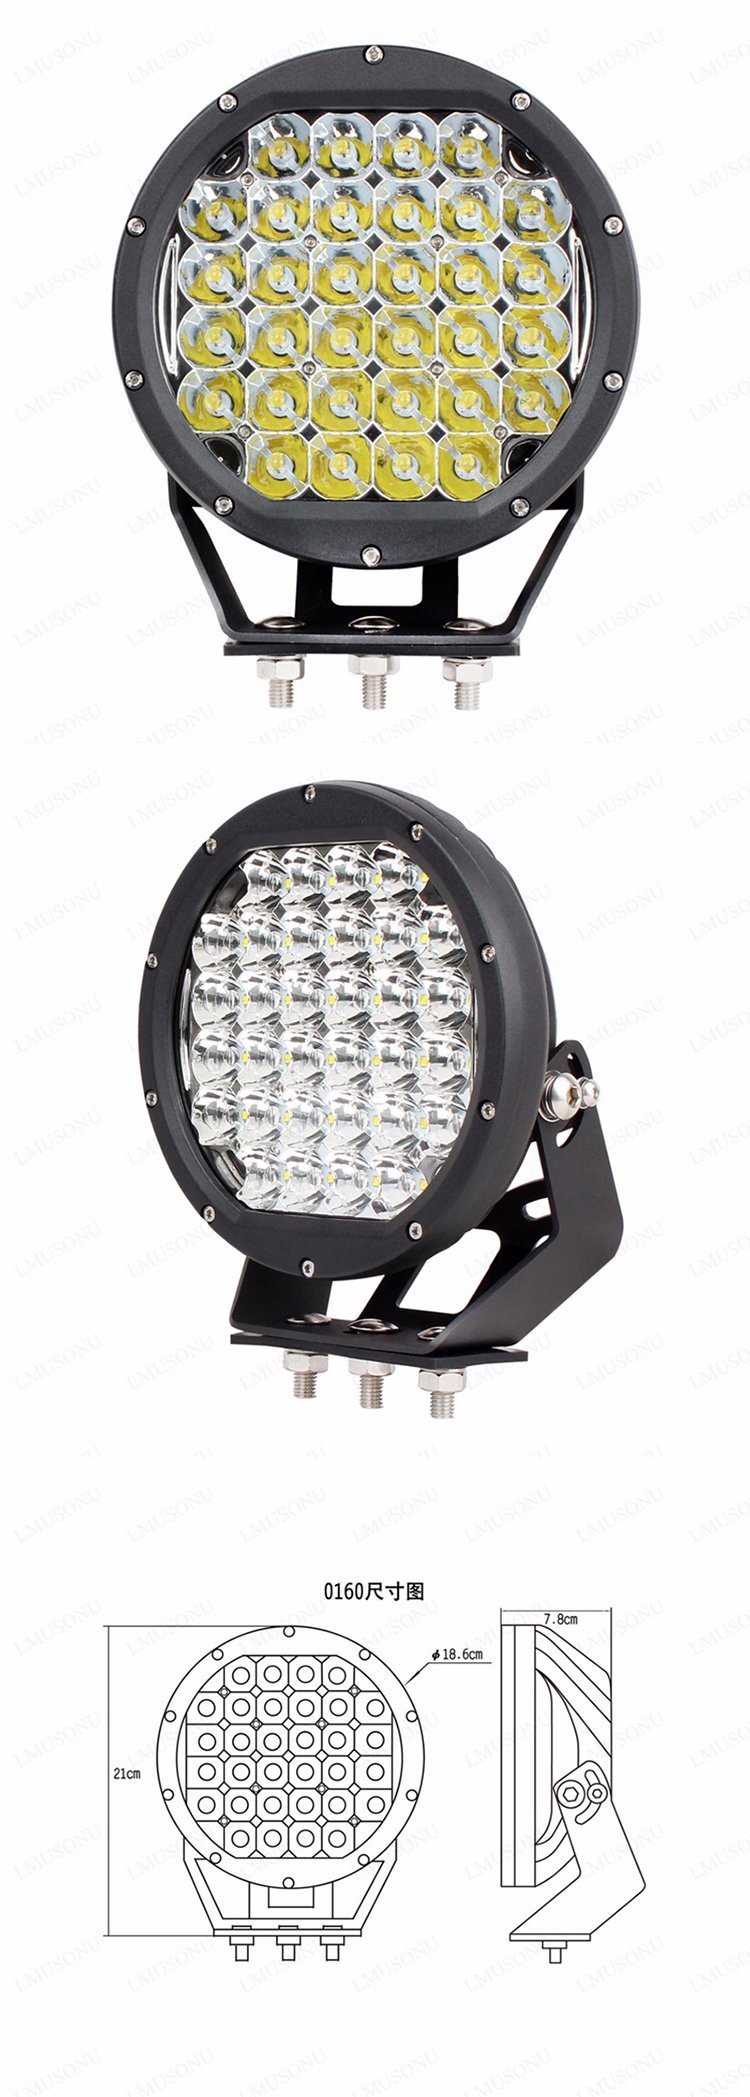 Round 8 Inch 160W Offroad LED Driving Light CREE Spot Flood Lamp